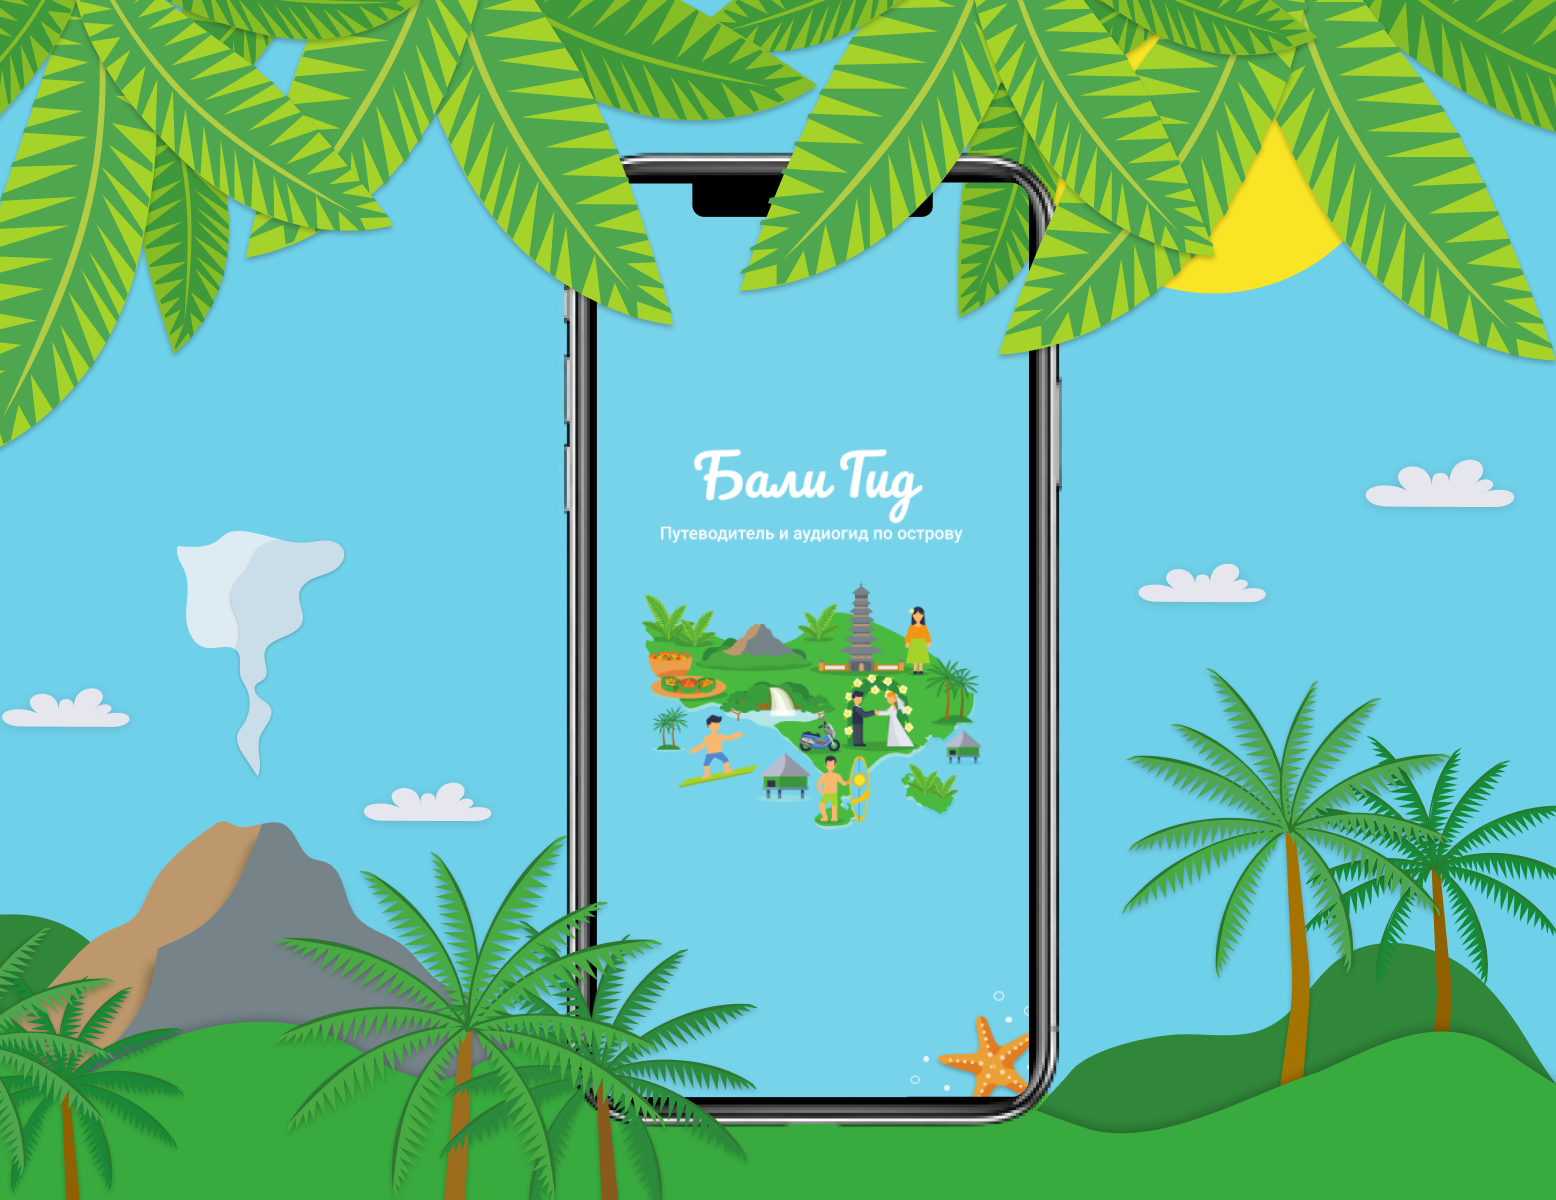 An artwork showing the design of the app's splash screen inside iPhone case which is hidden in tropical leaves